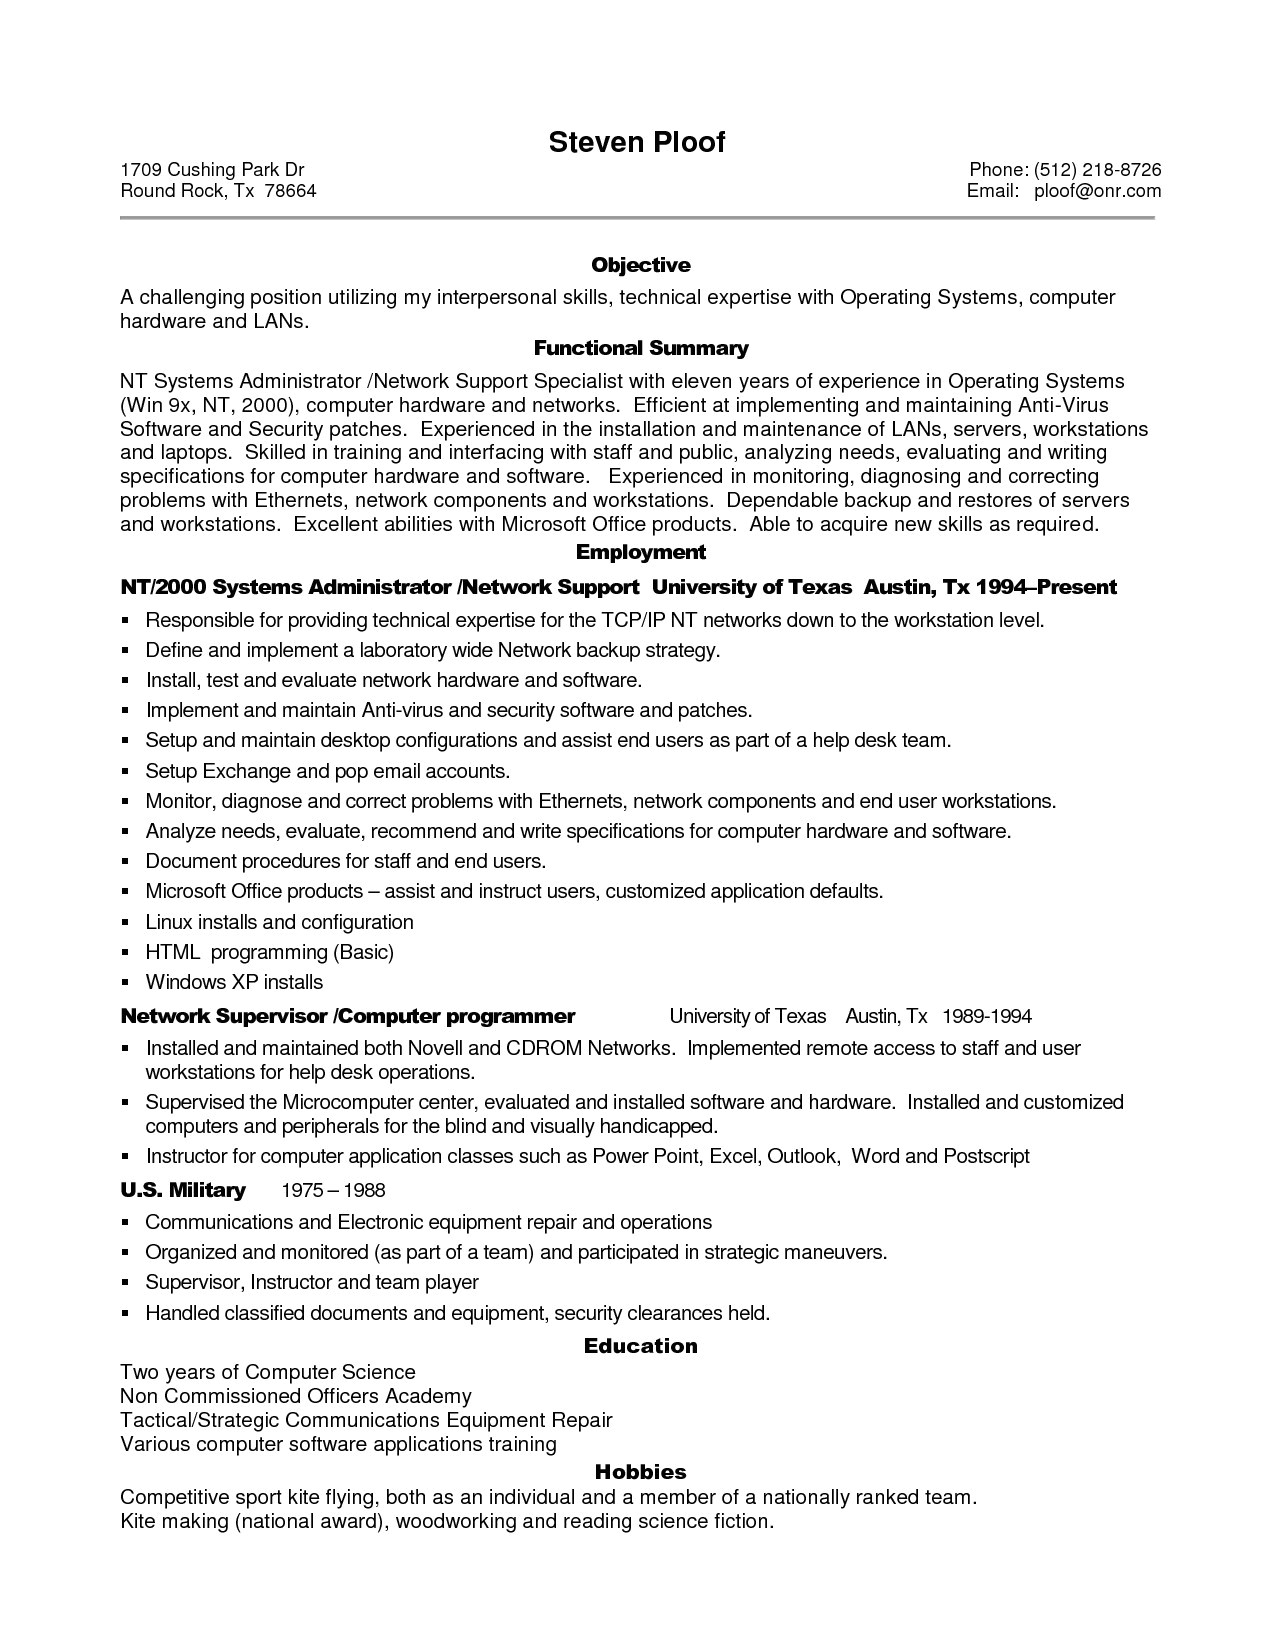 resumes for experienced professionals